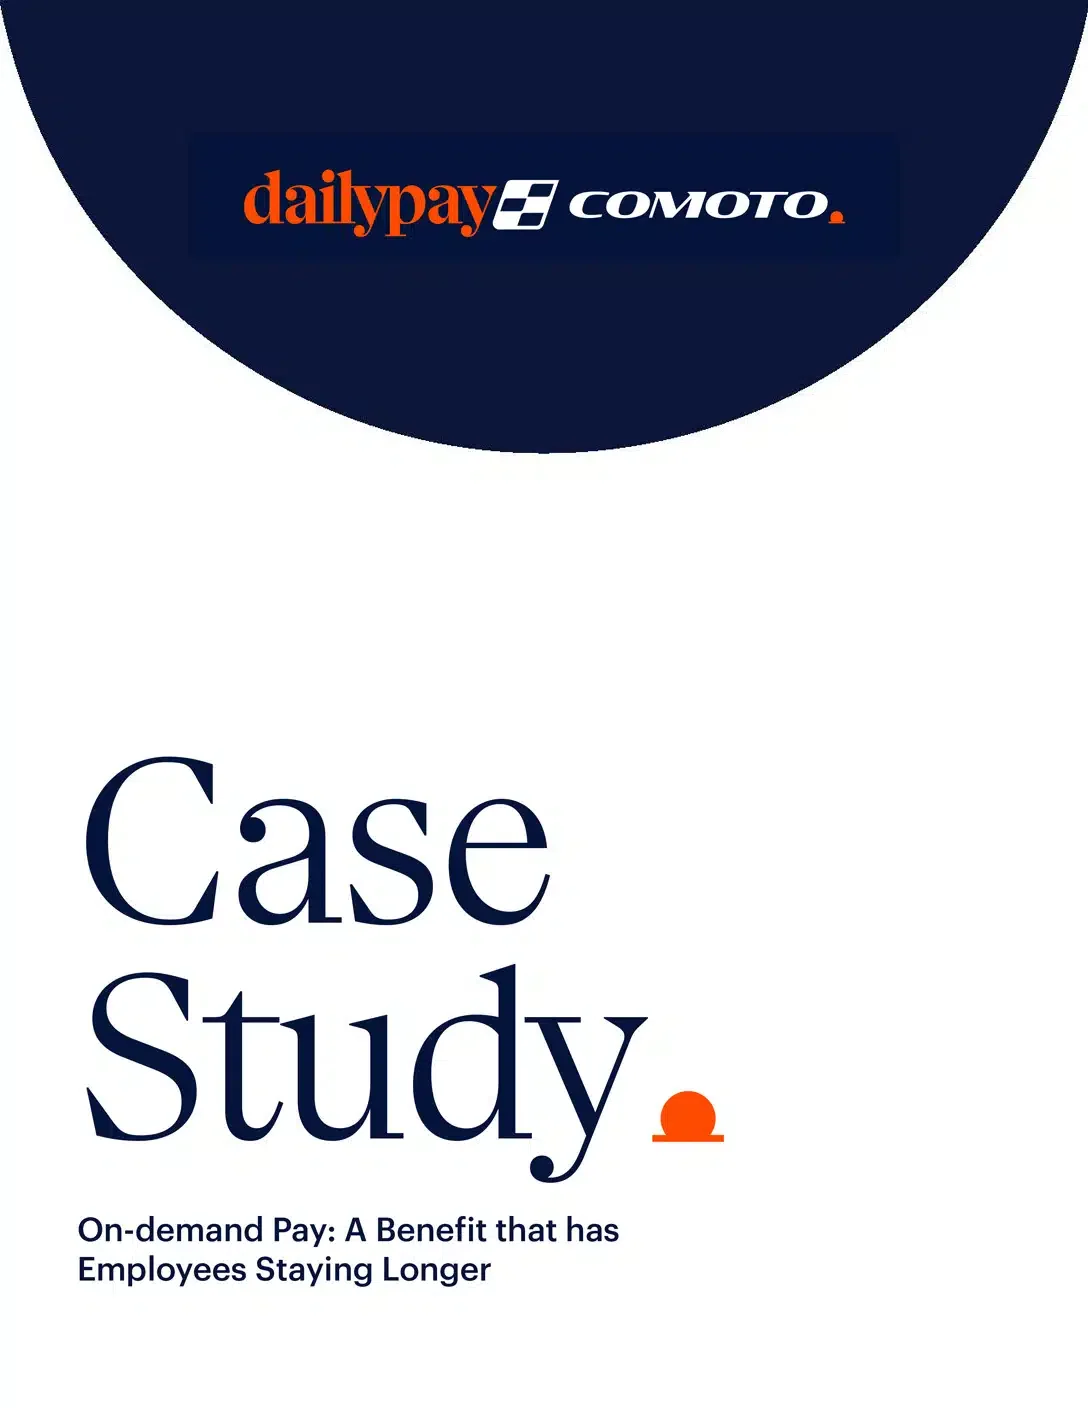 A cover image for a case study titled "On-demand Pay: A Benefit that has Employees Staying Longer," featuring DailyPay and Comoto logos.